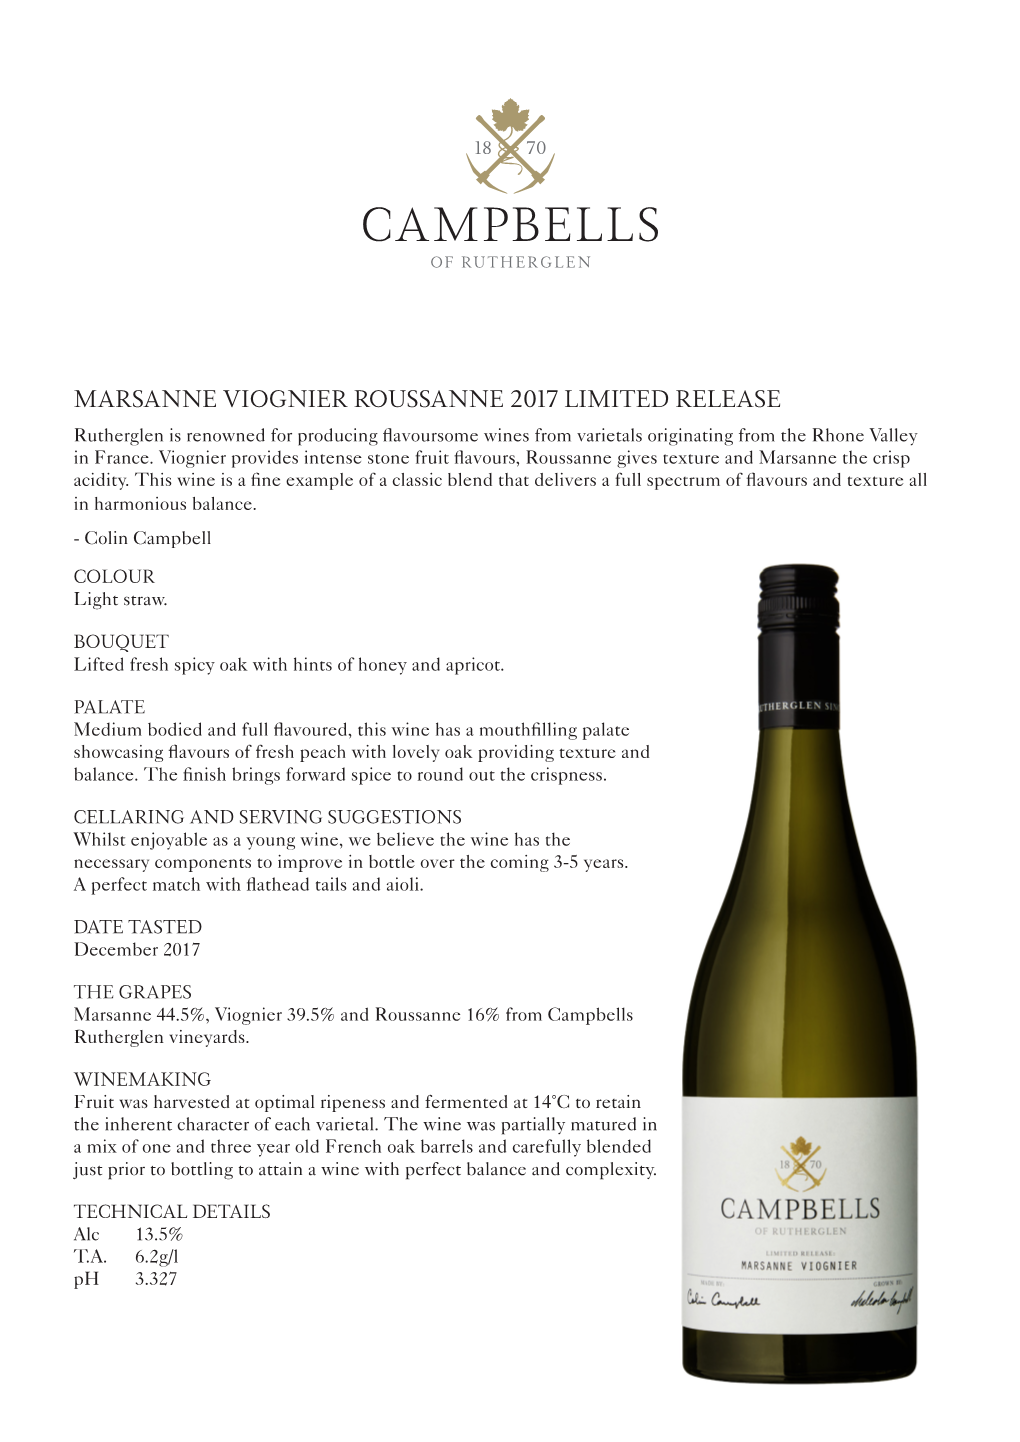 MARSANNE VIOGNIER ROUSSANNE 2017 LIMITED RELEASE Rutherglen Is Renowned for Producing Flavoursome Wines from Varietals Originating from the Rhone Valley in France